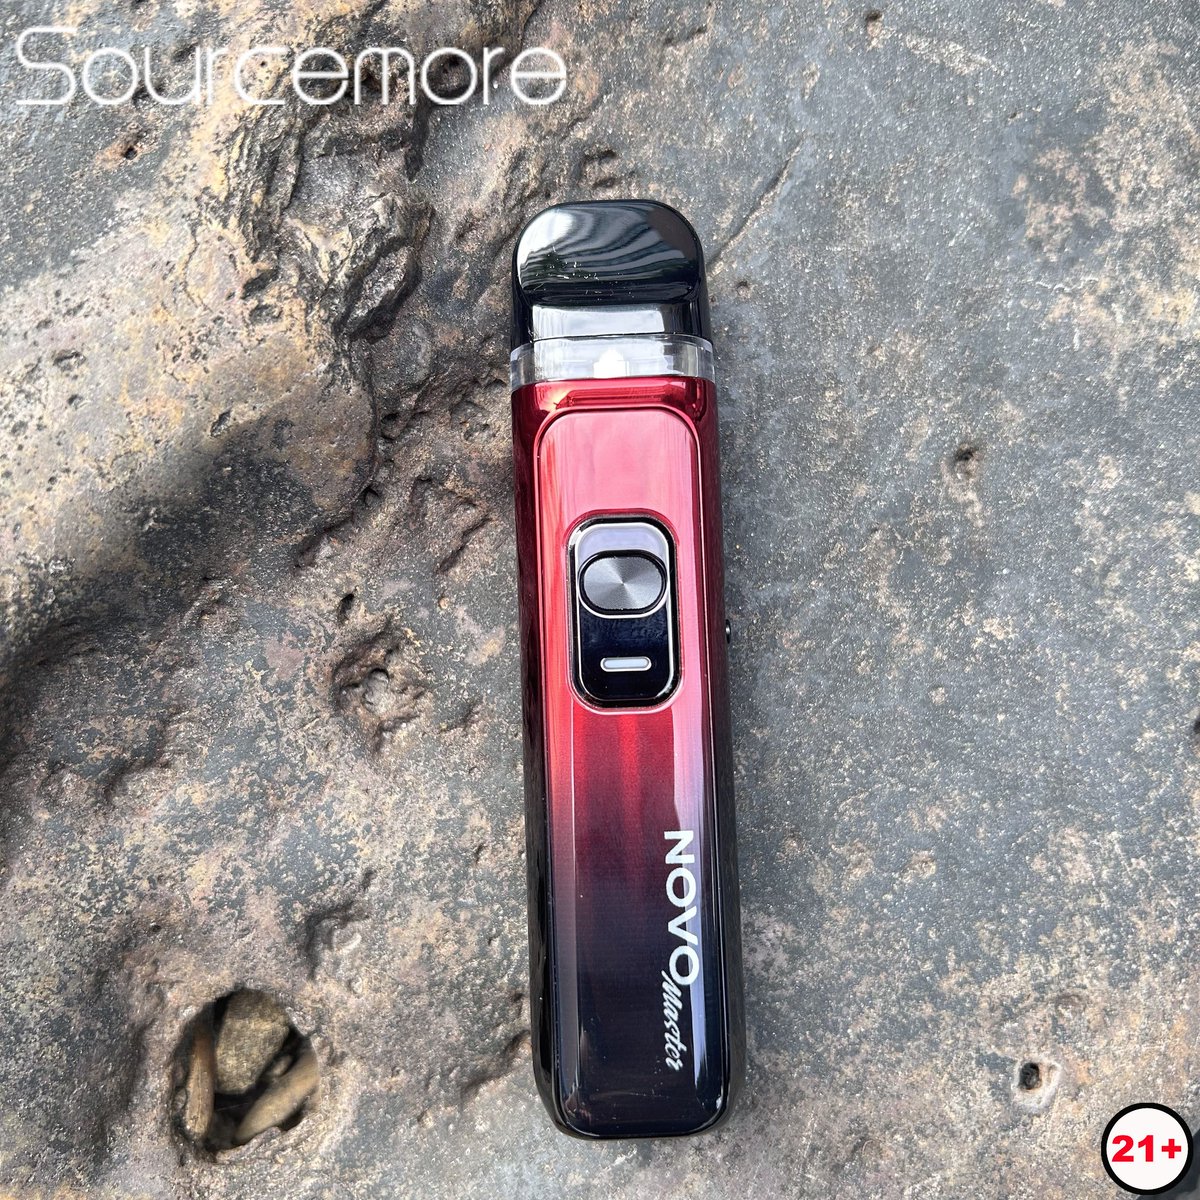 SMOK Novo Master Kit 

Double click the power button to switch the power mode❤️💯

👀Photo by Sourcemore

⚠ Warning: The device is used with e-liquid which contains addictive chemical nicotine. For Adult use only.

#sourcemore #sourcemoreofficial #SMOK #NovoMaster